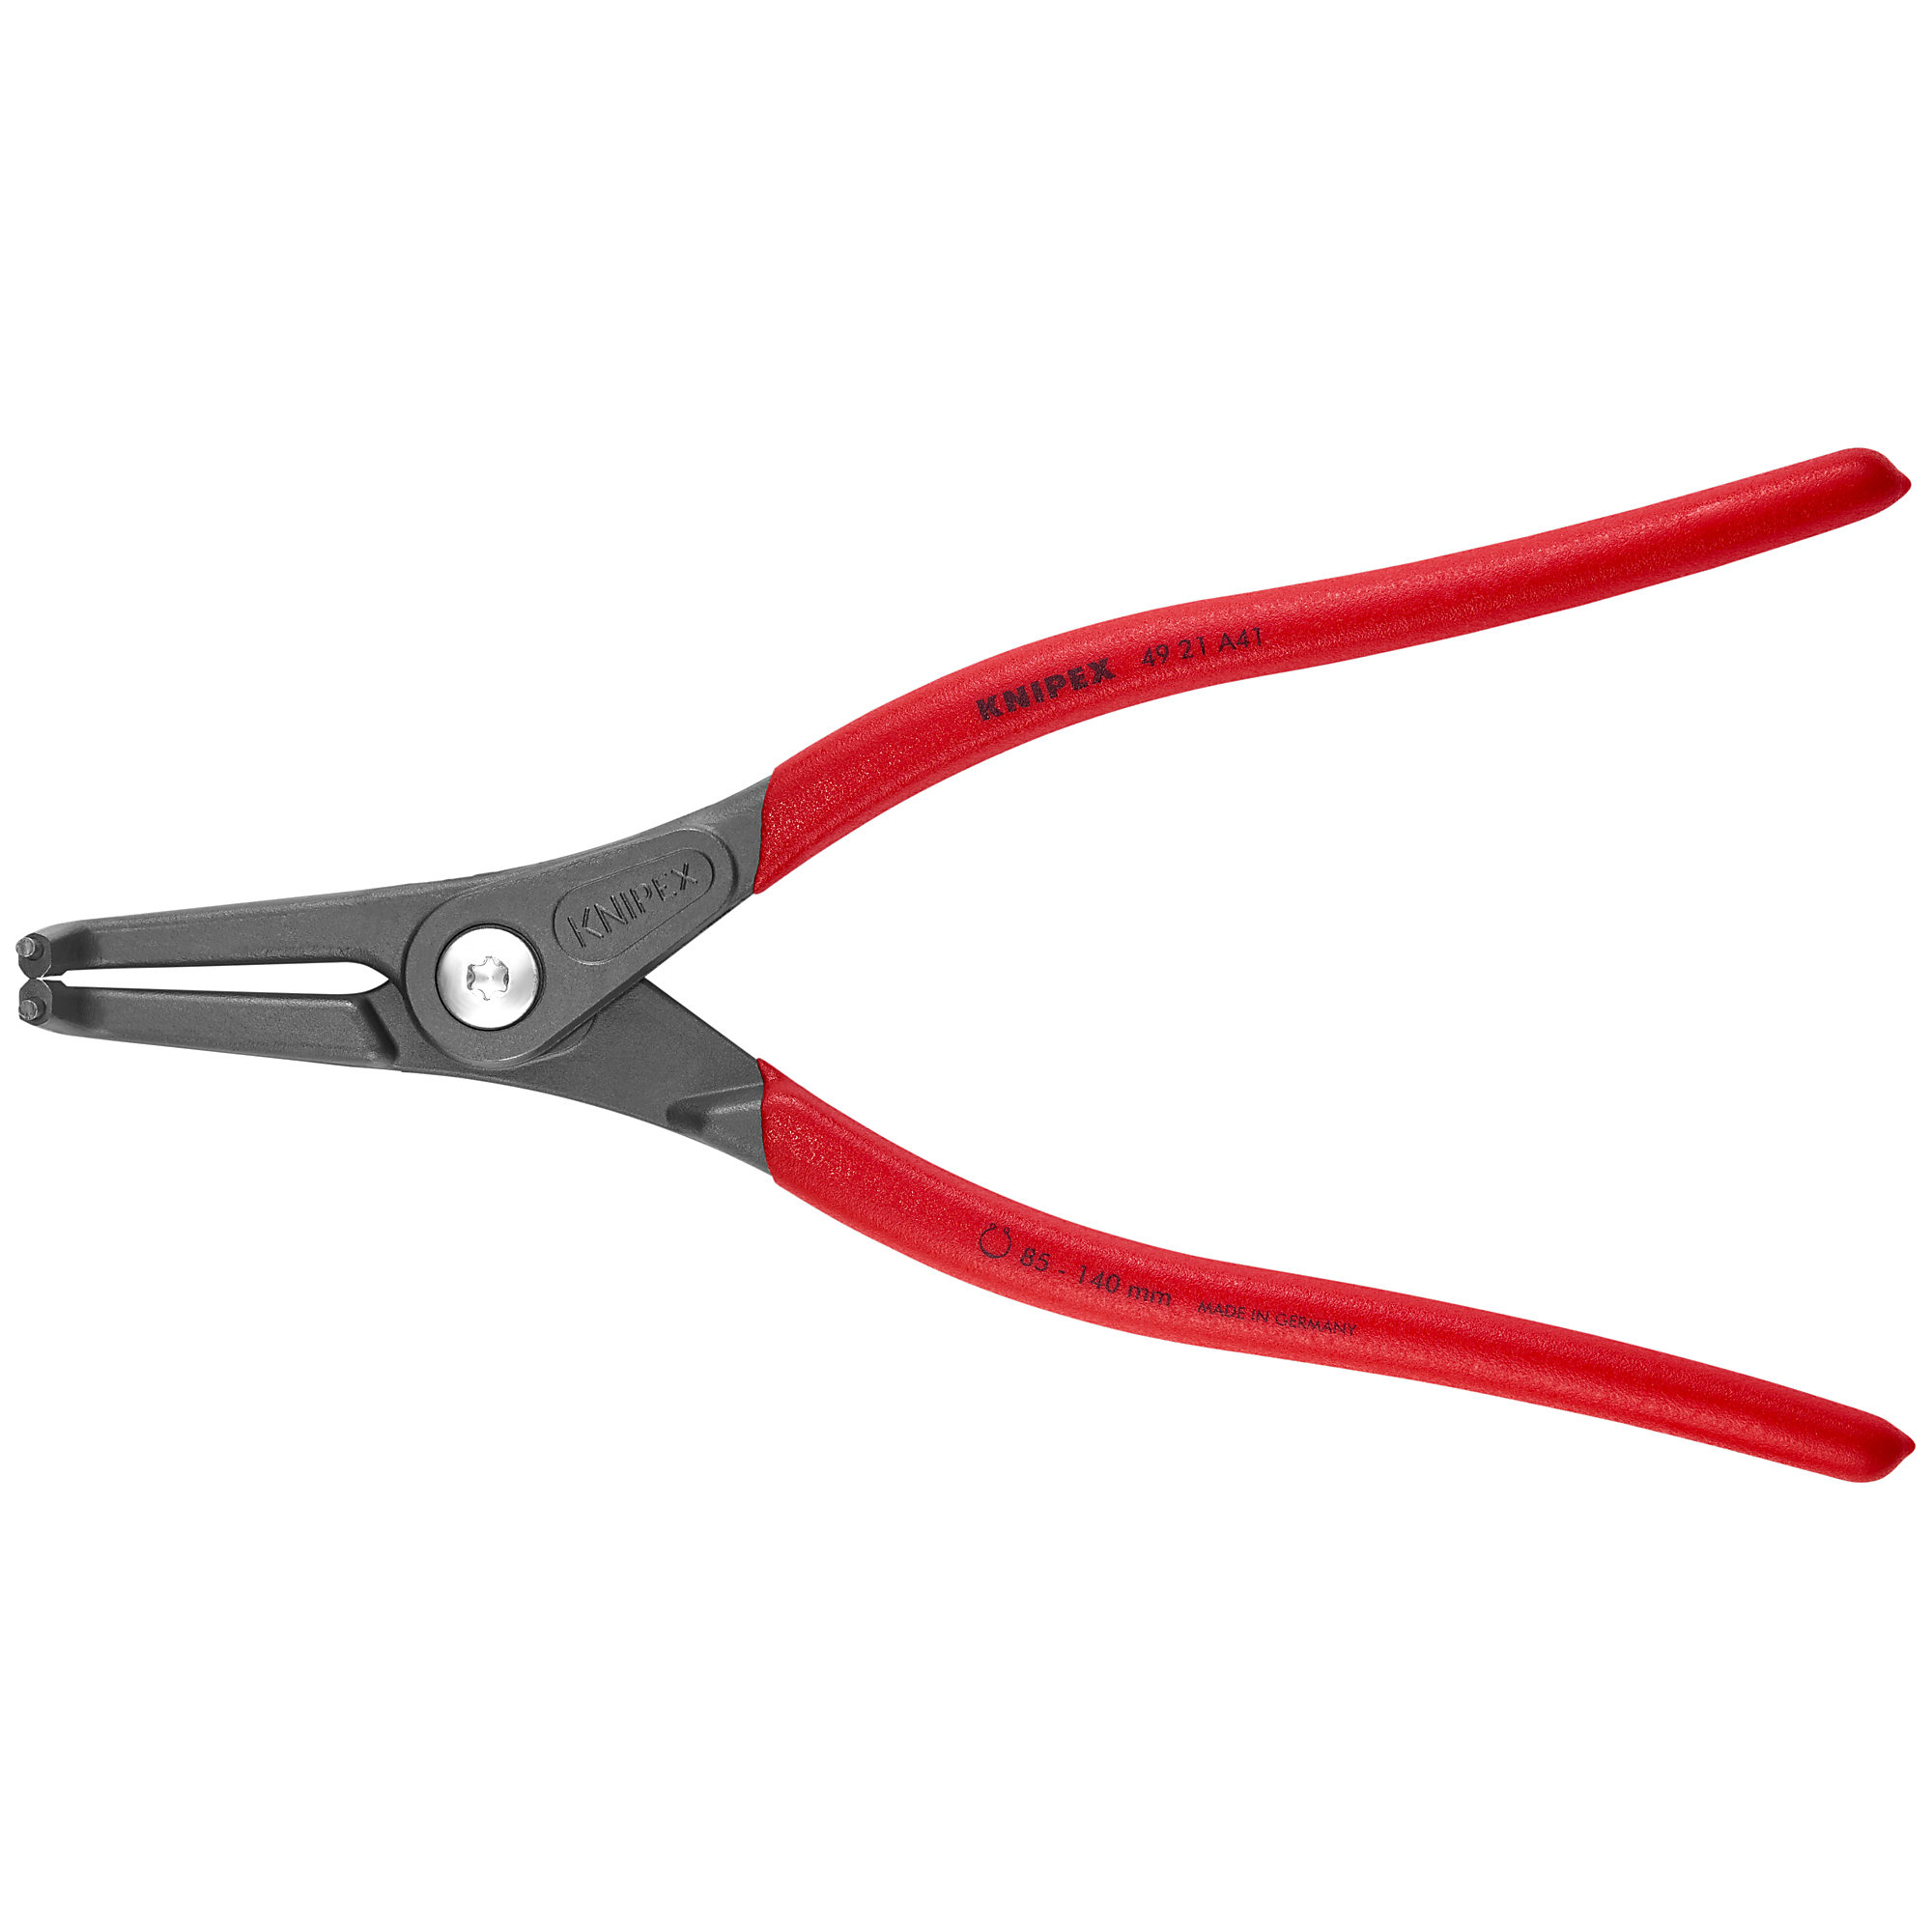 KNIPEX, Ext 90Â° Prec. Snap Ring Pliers, 1/8 tip, 12.25Inch, Pieces (qty.) 1 Material Steel, Model 49 21 A41